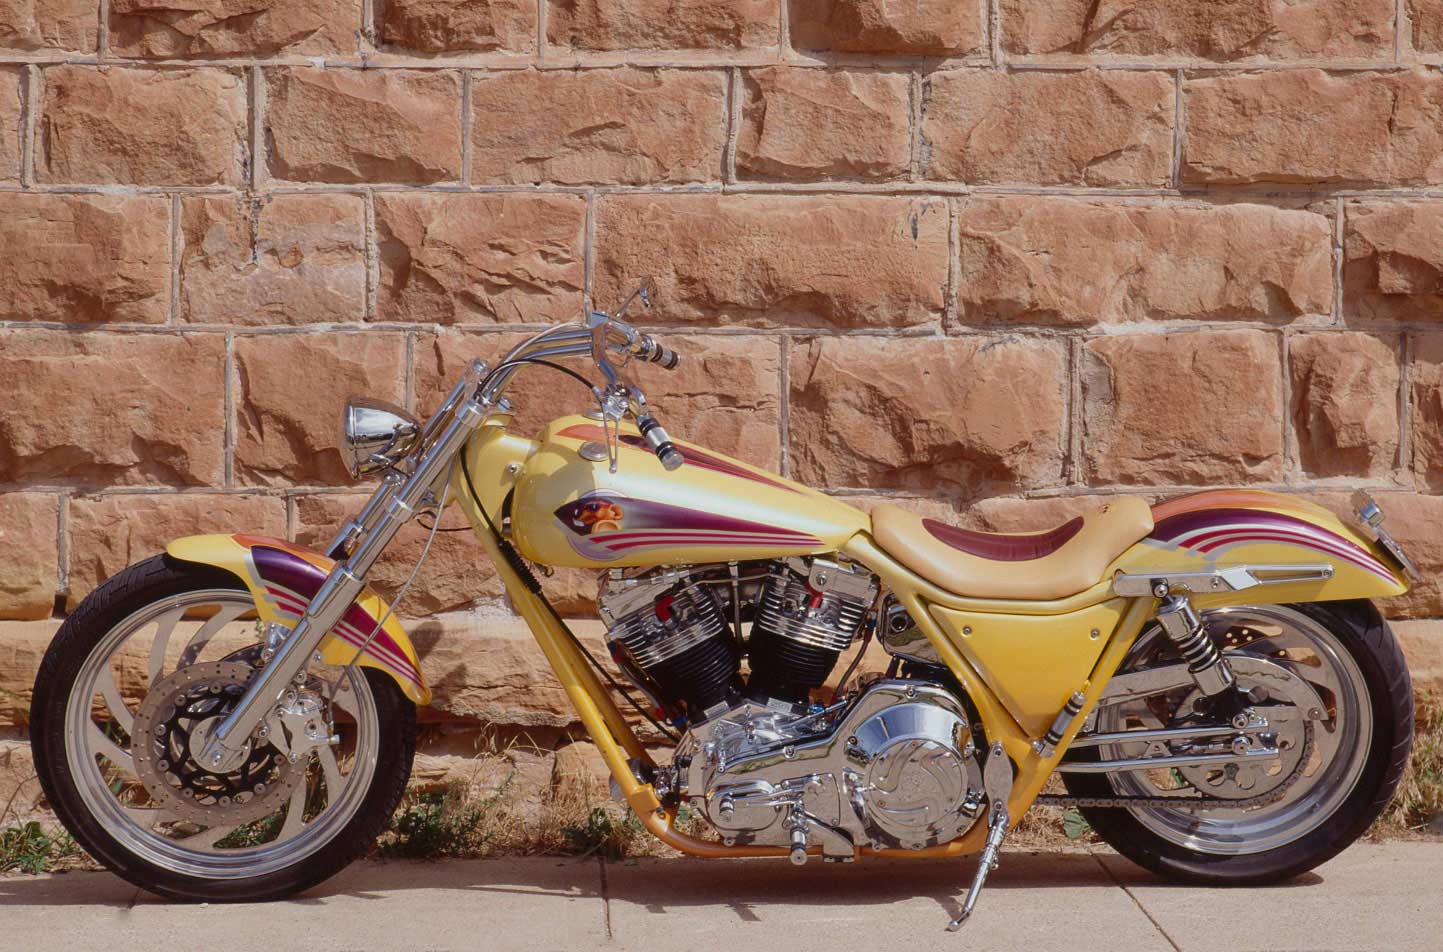 Mike Brown’s 1992 FXRT (at one time) took six months to build. It houses a beefy 106-inch engine.